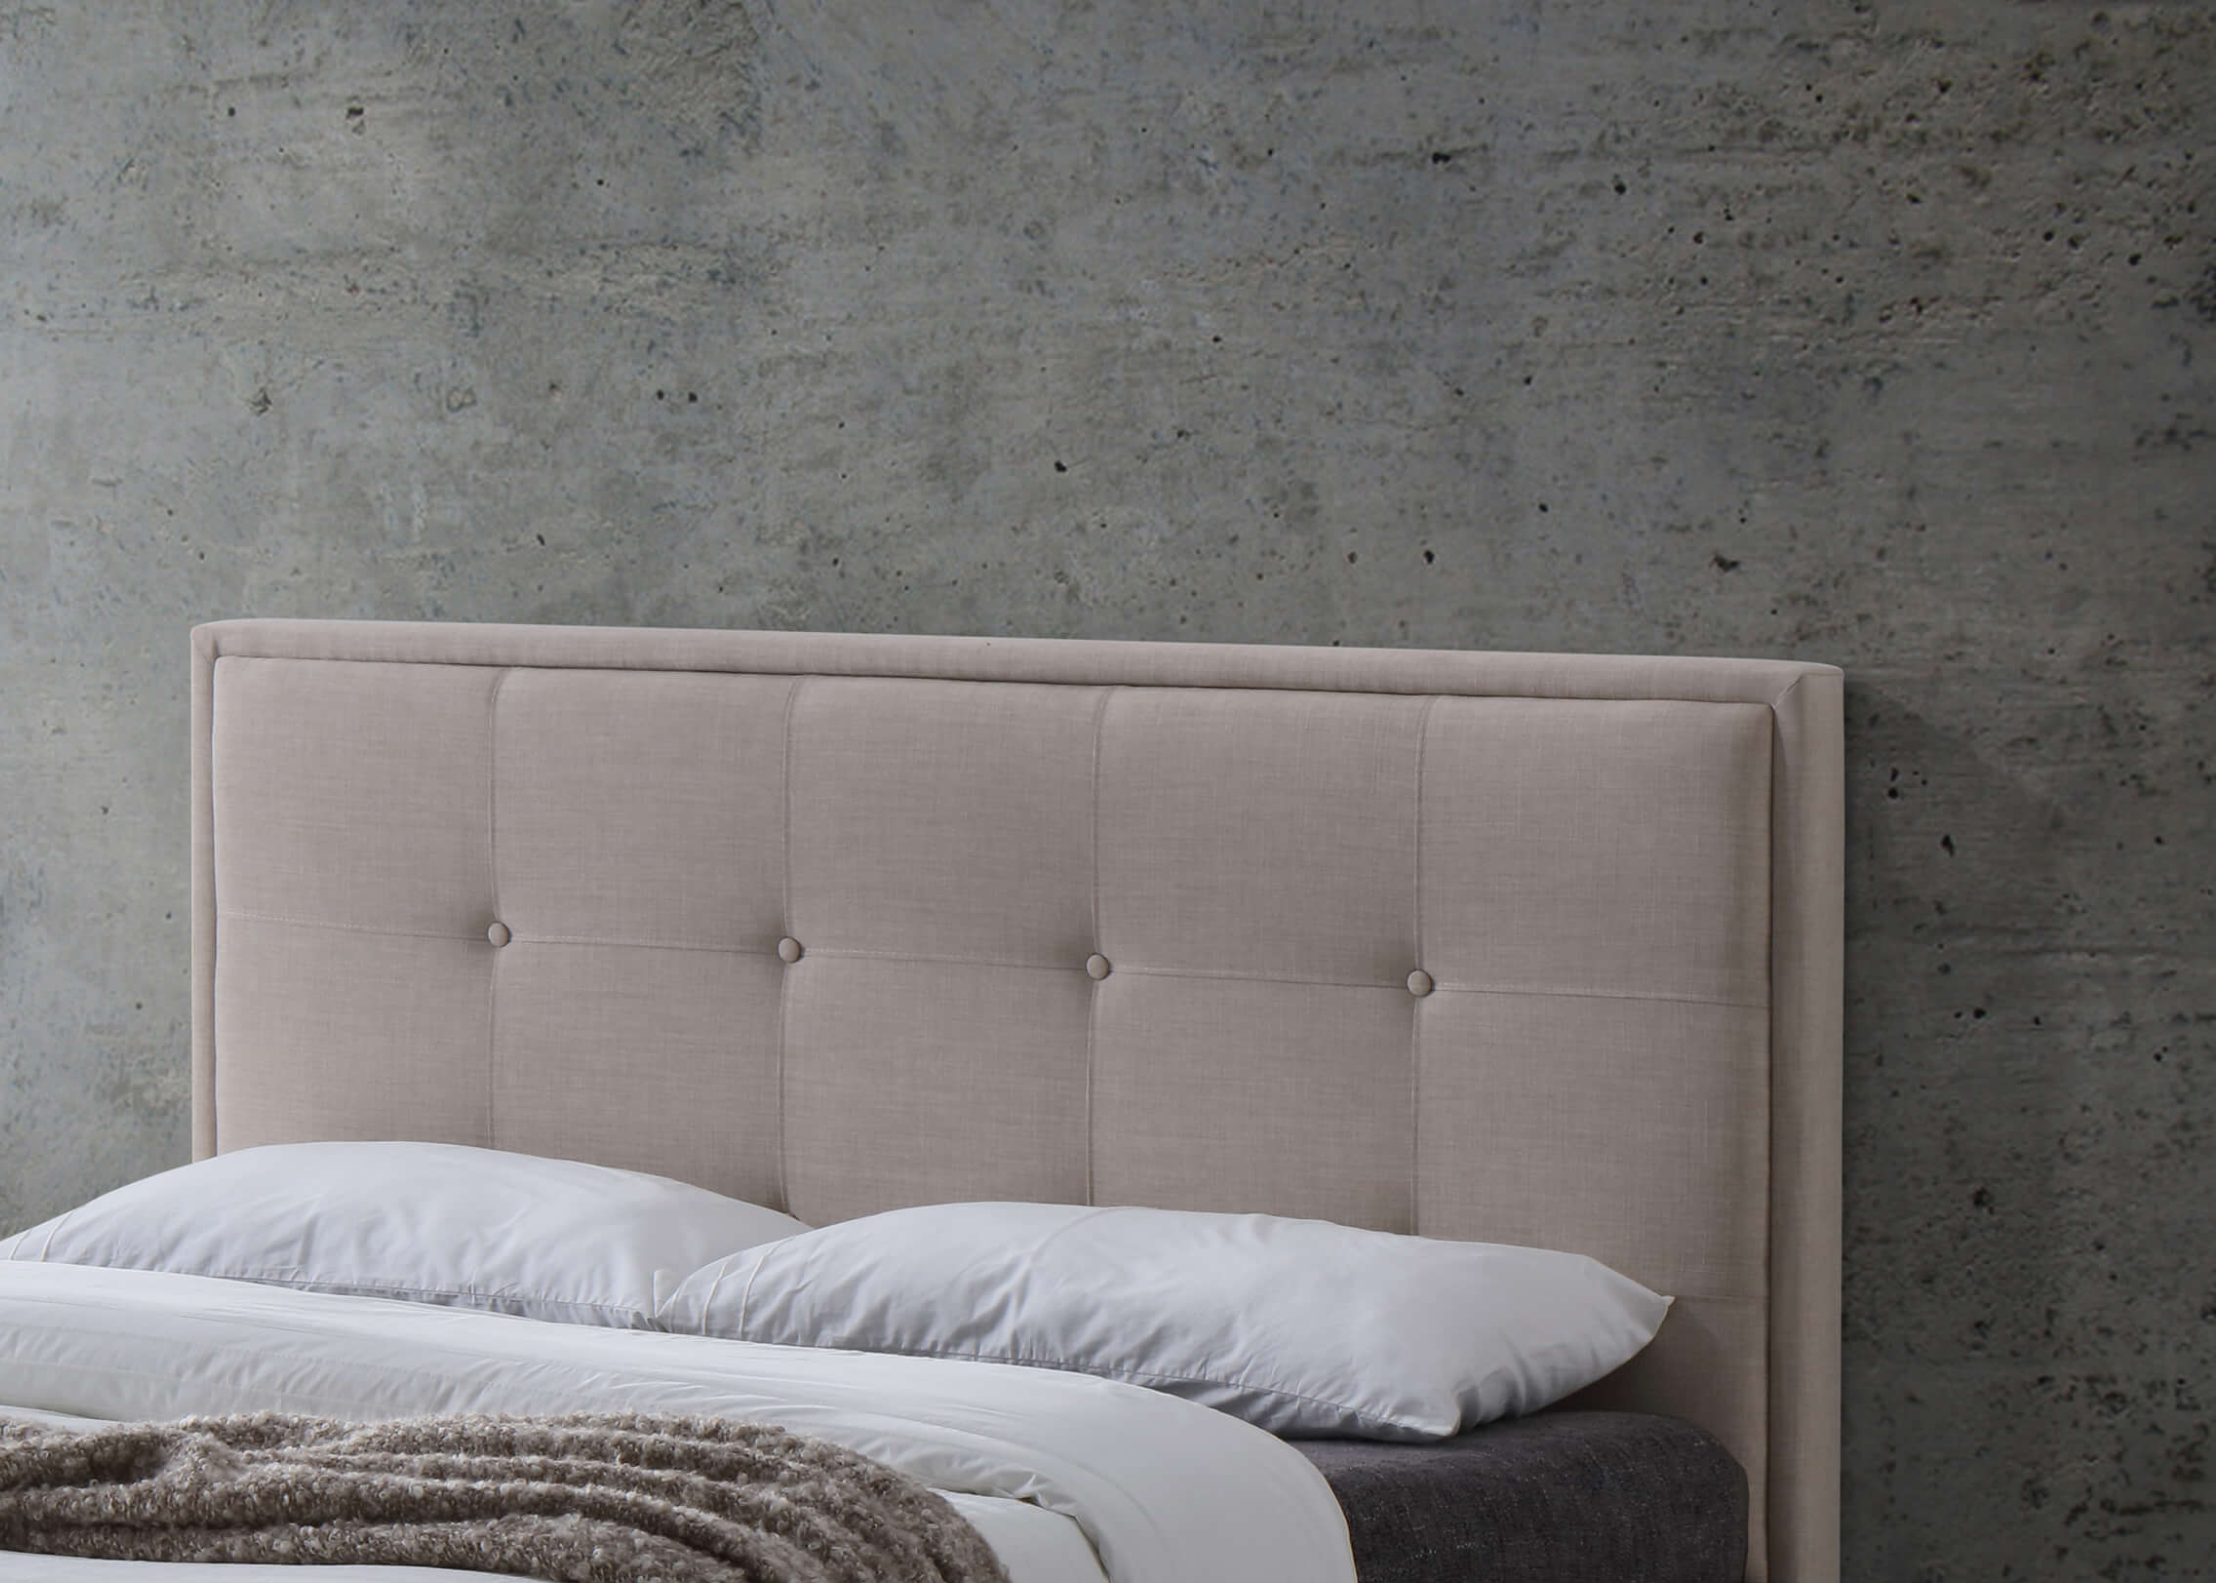 Halo Bedhead: Elegant Fabric Bedheads in Beige, Charcoal, and Mid Grey